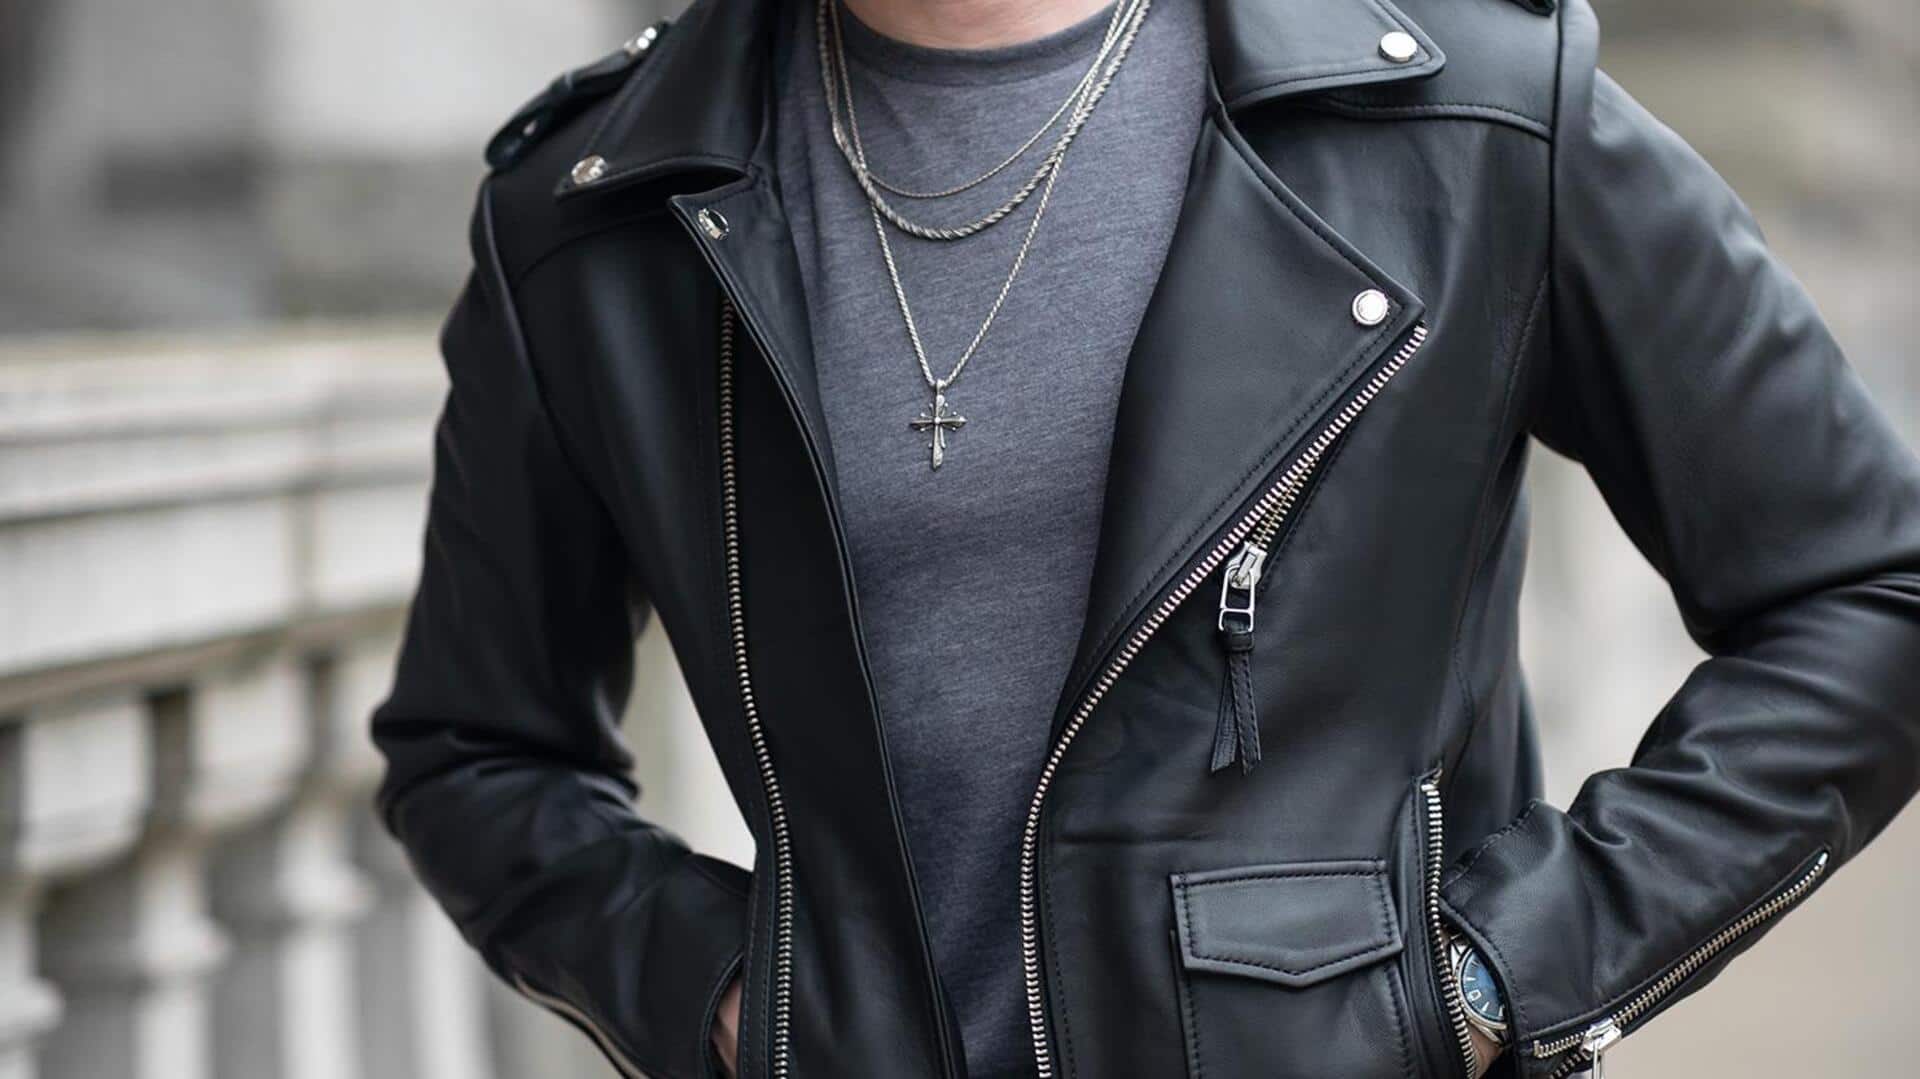 Biker jackets meet business casual: Tips to ace this style